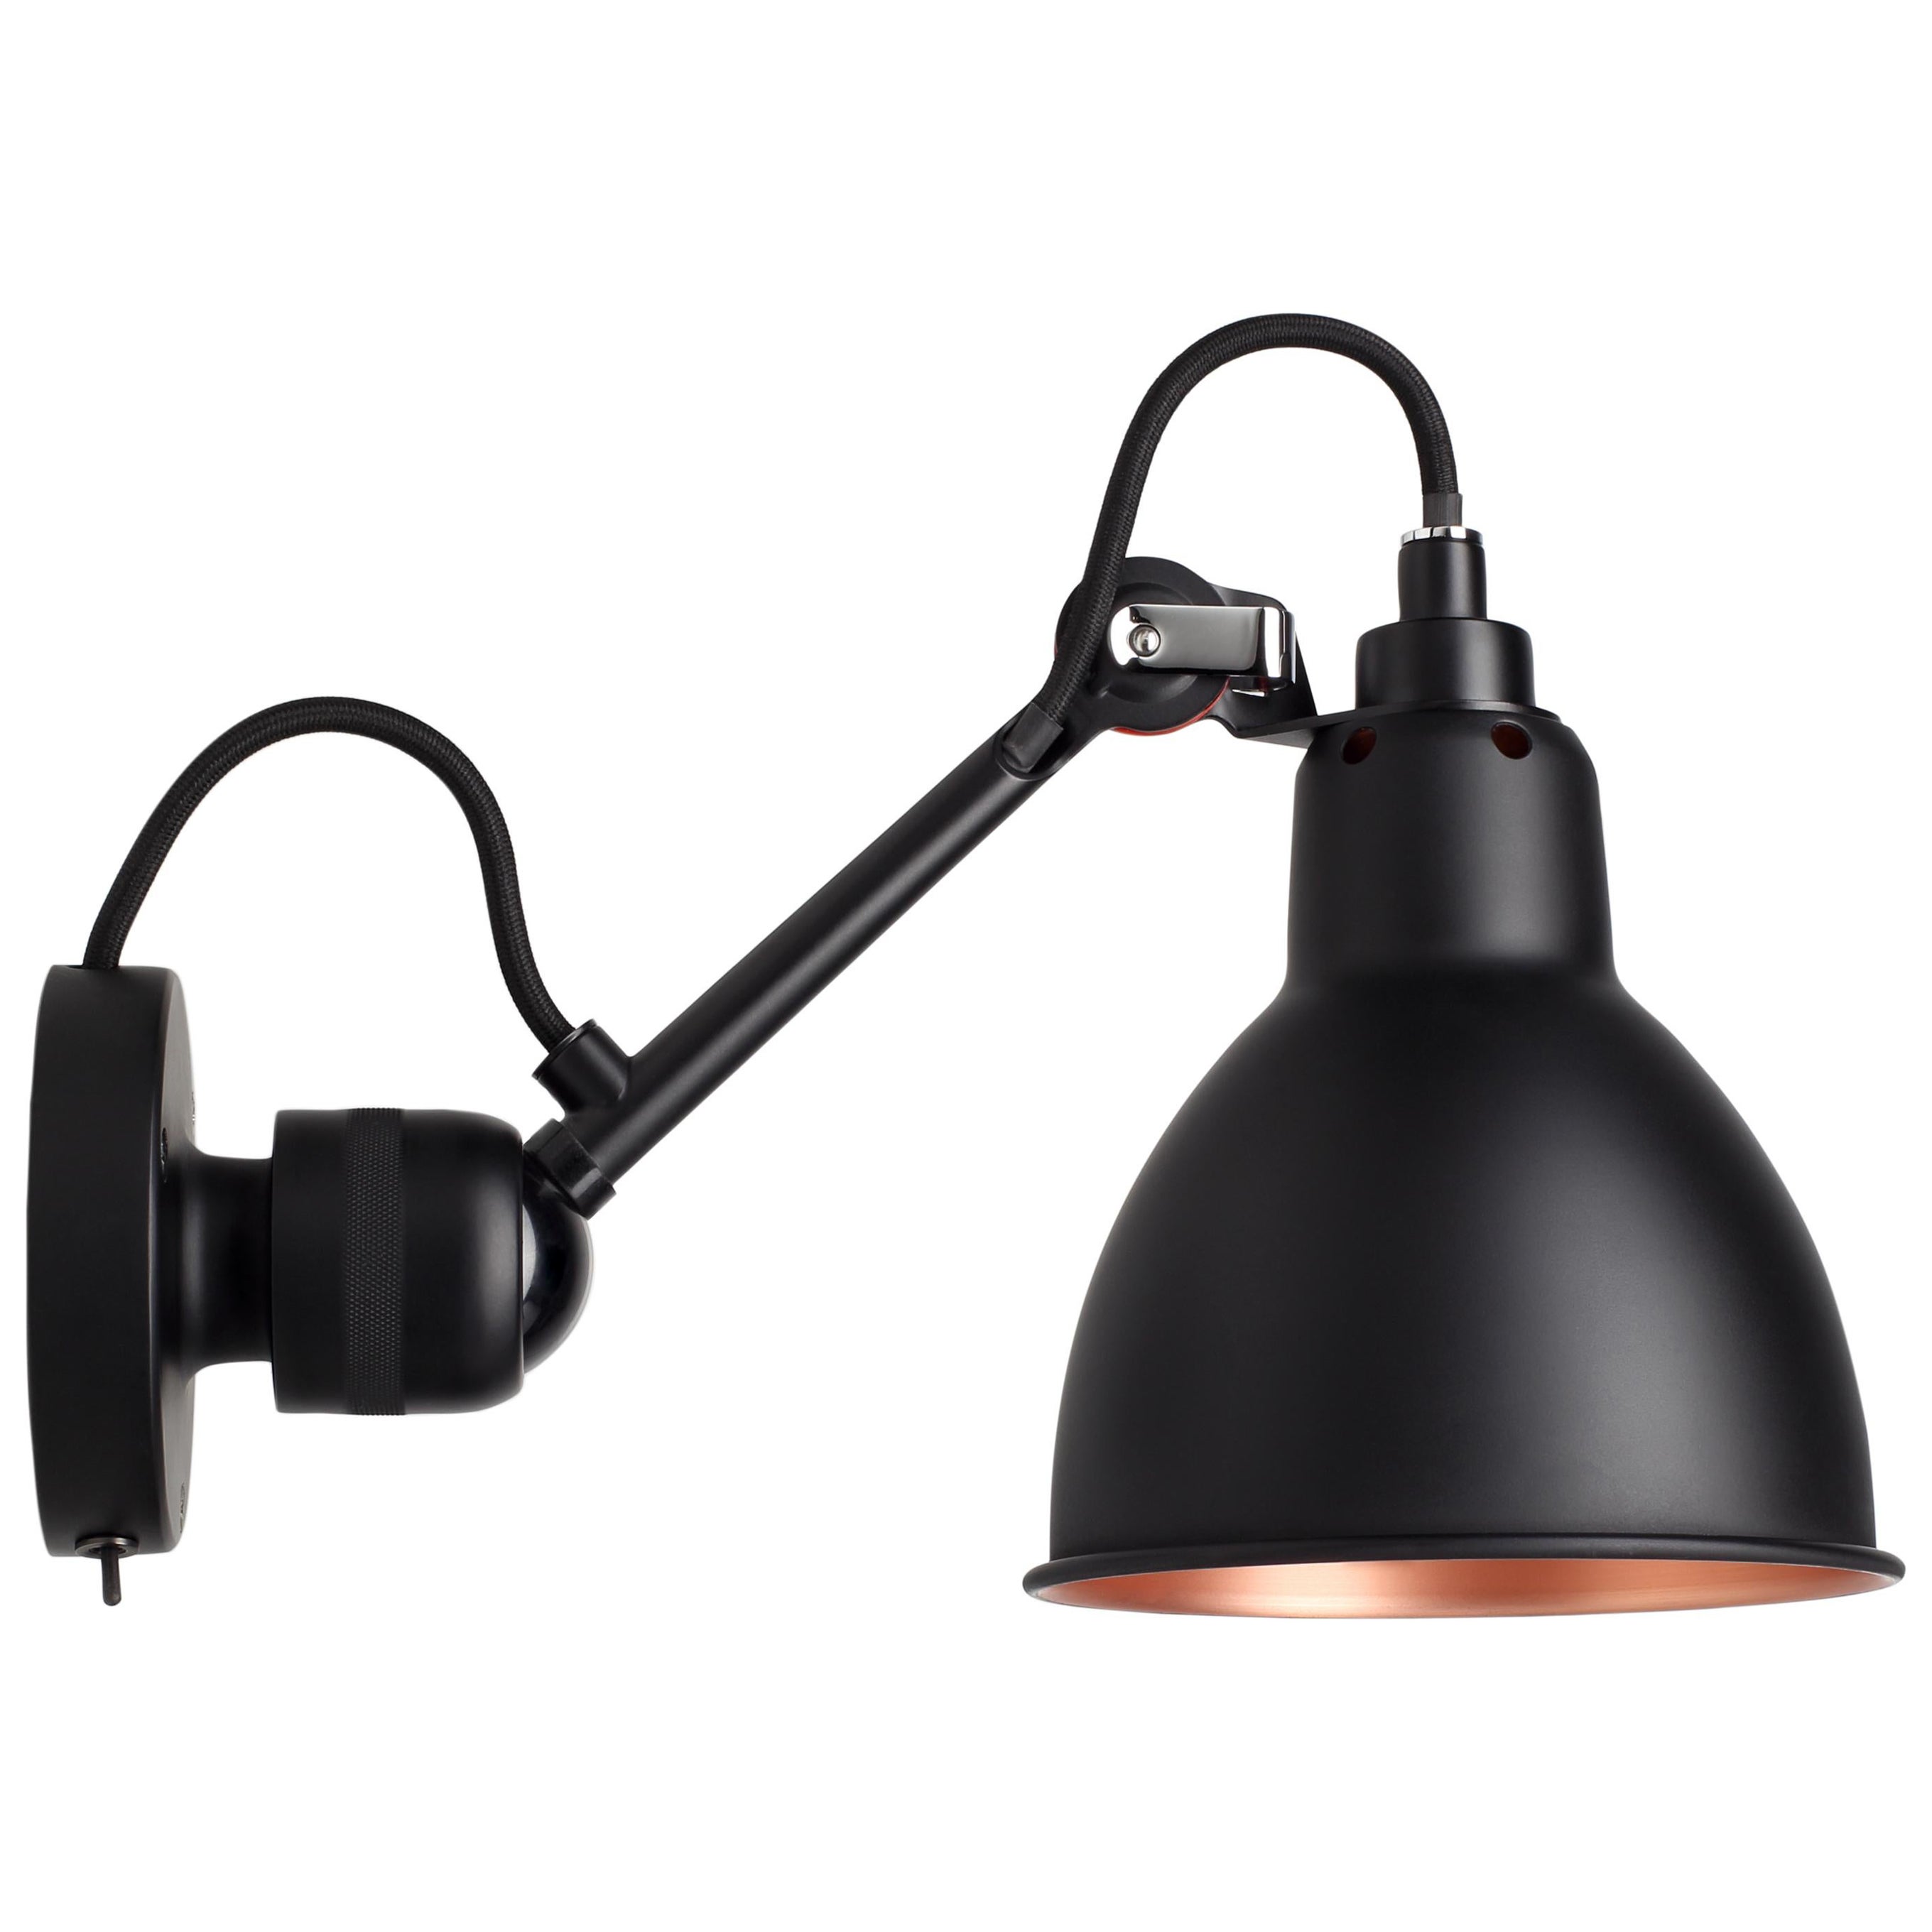 DCW Editions La Lampe Gras N°304 SW Wall Lamp in Black Arm & Black Copper Shade For Sale